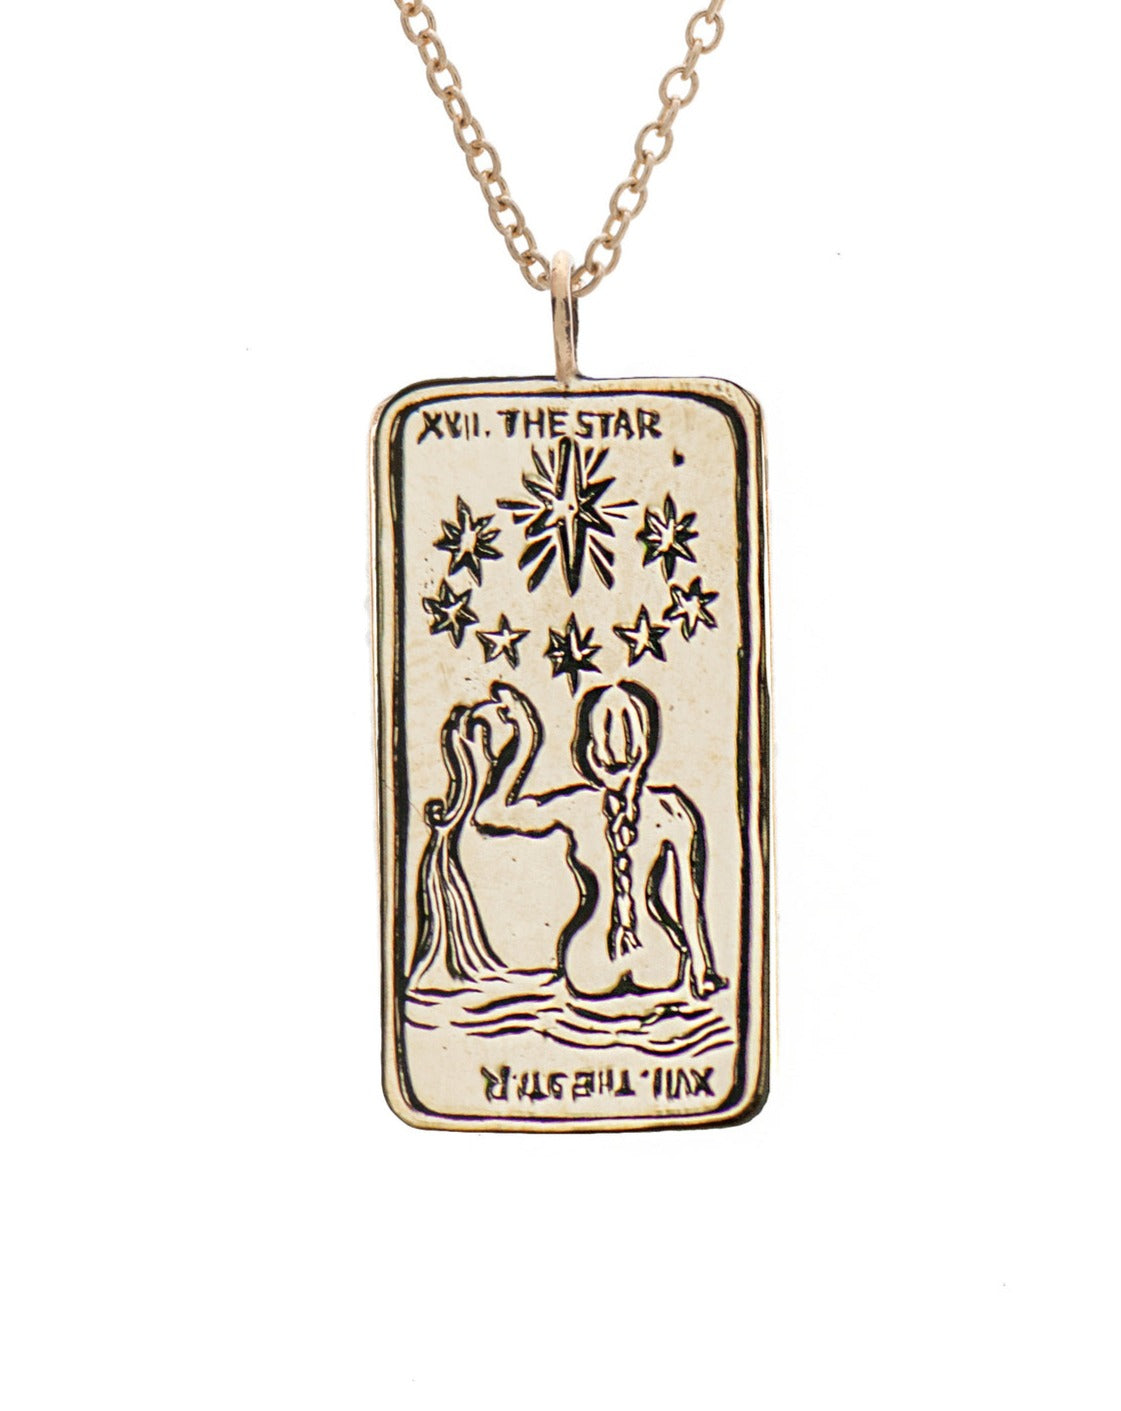 Buy Tarot Card Pendant Necklace Gold Silver or Rose Gold King of Wands  Mystic Jewelry Tarot Gifts Tarot Jewelry Gift for Her Him Uluer Jewelry  Online in India - Etsy